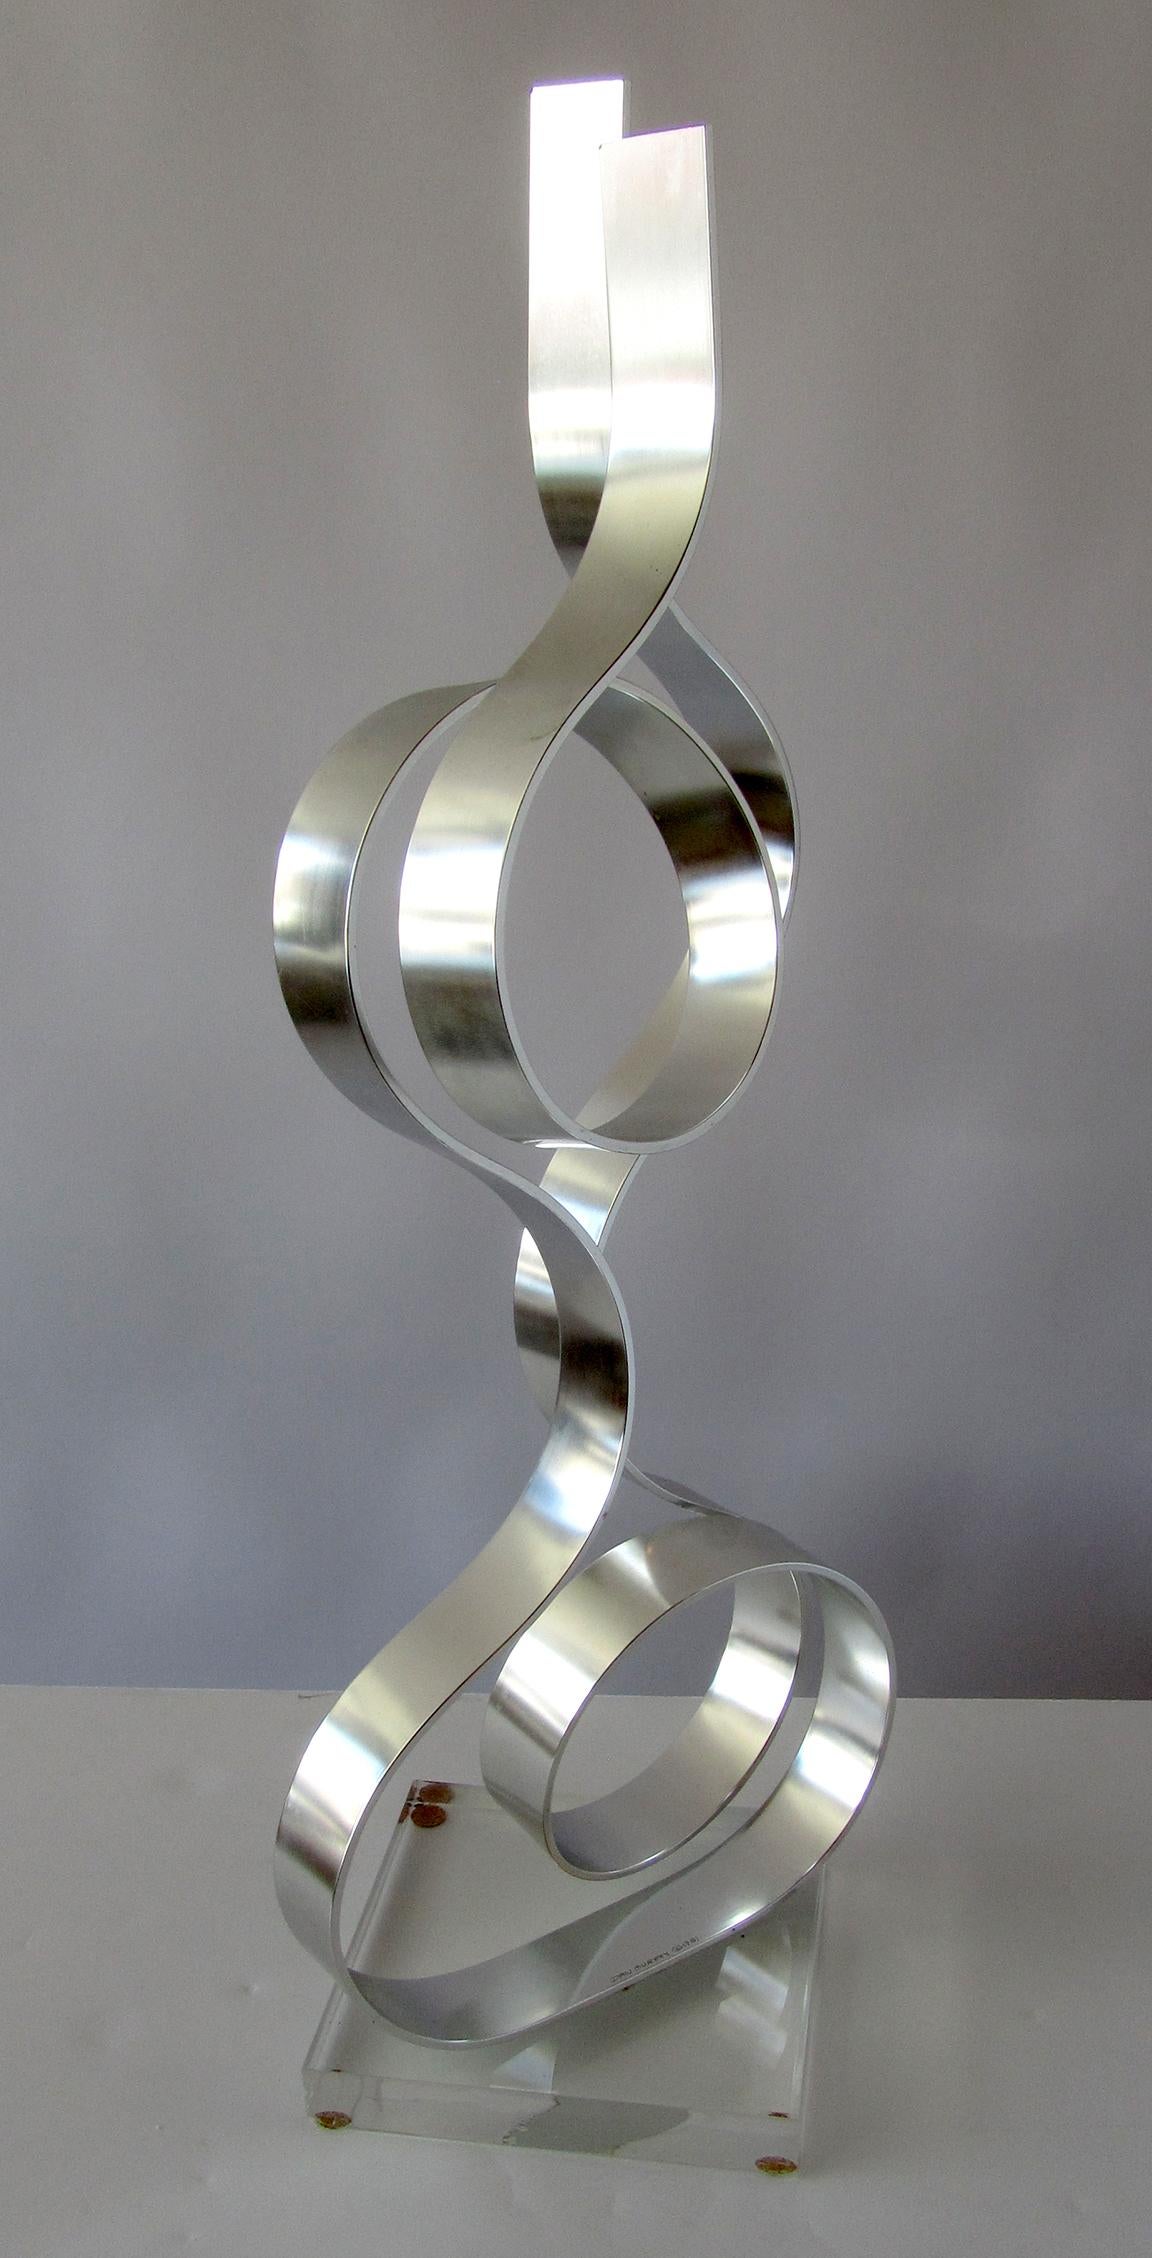 This extraordinary sculpture is one band of polished steel twisted and manipulated into this form.